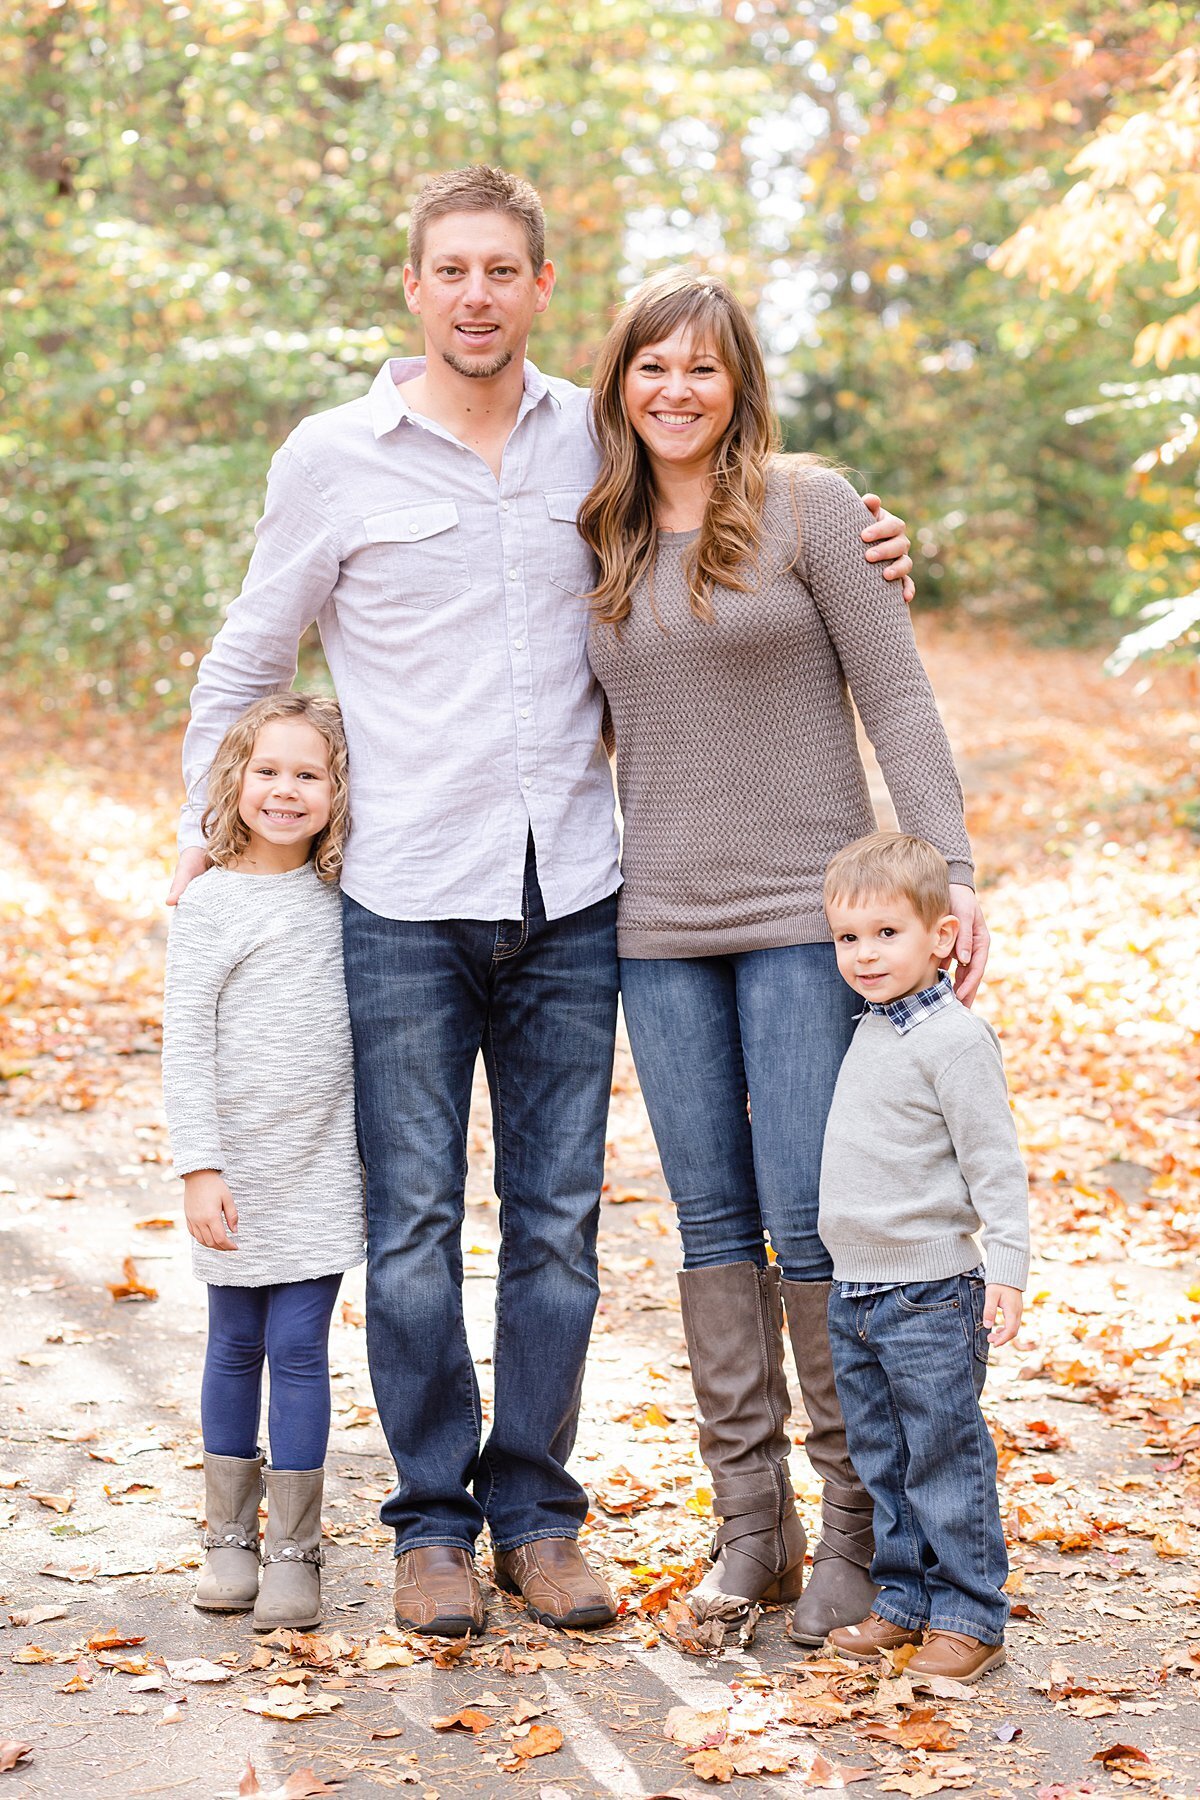 outdoor-fall-mini-sessions-cleveland-park-greenville-sc-7